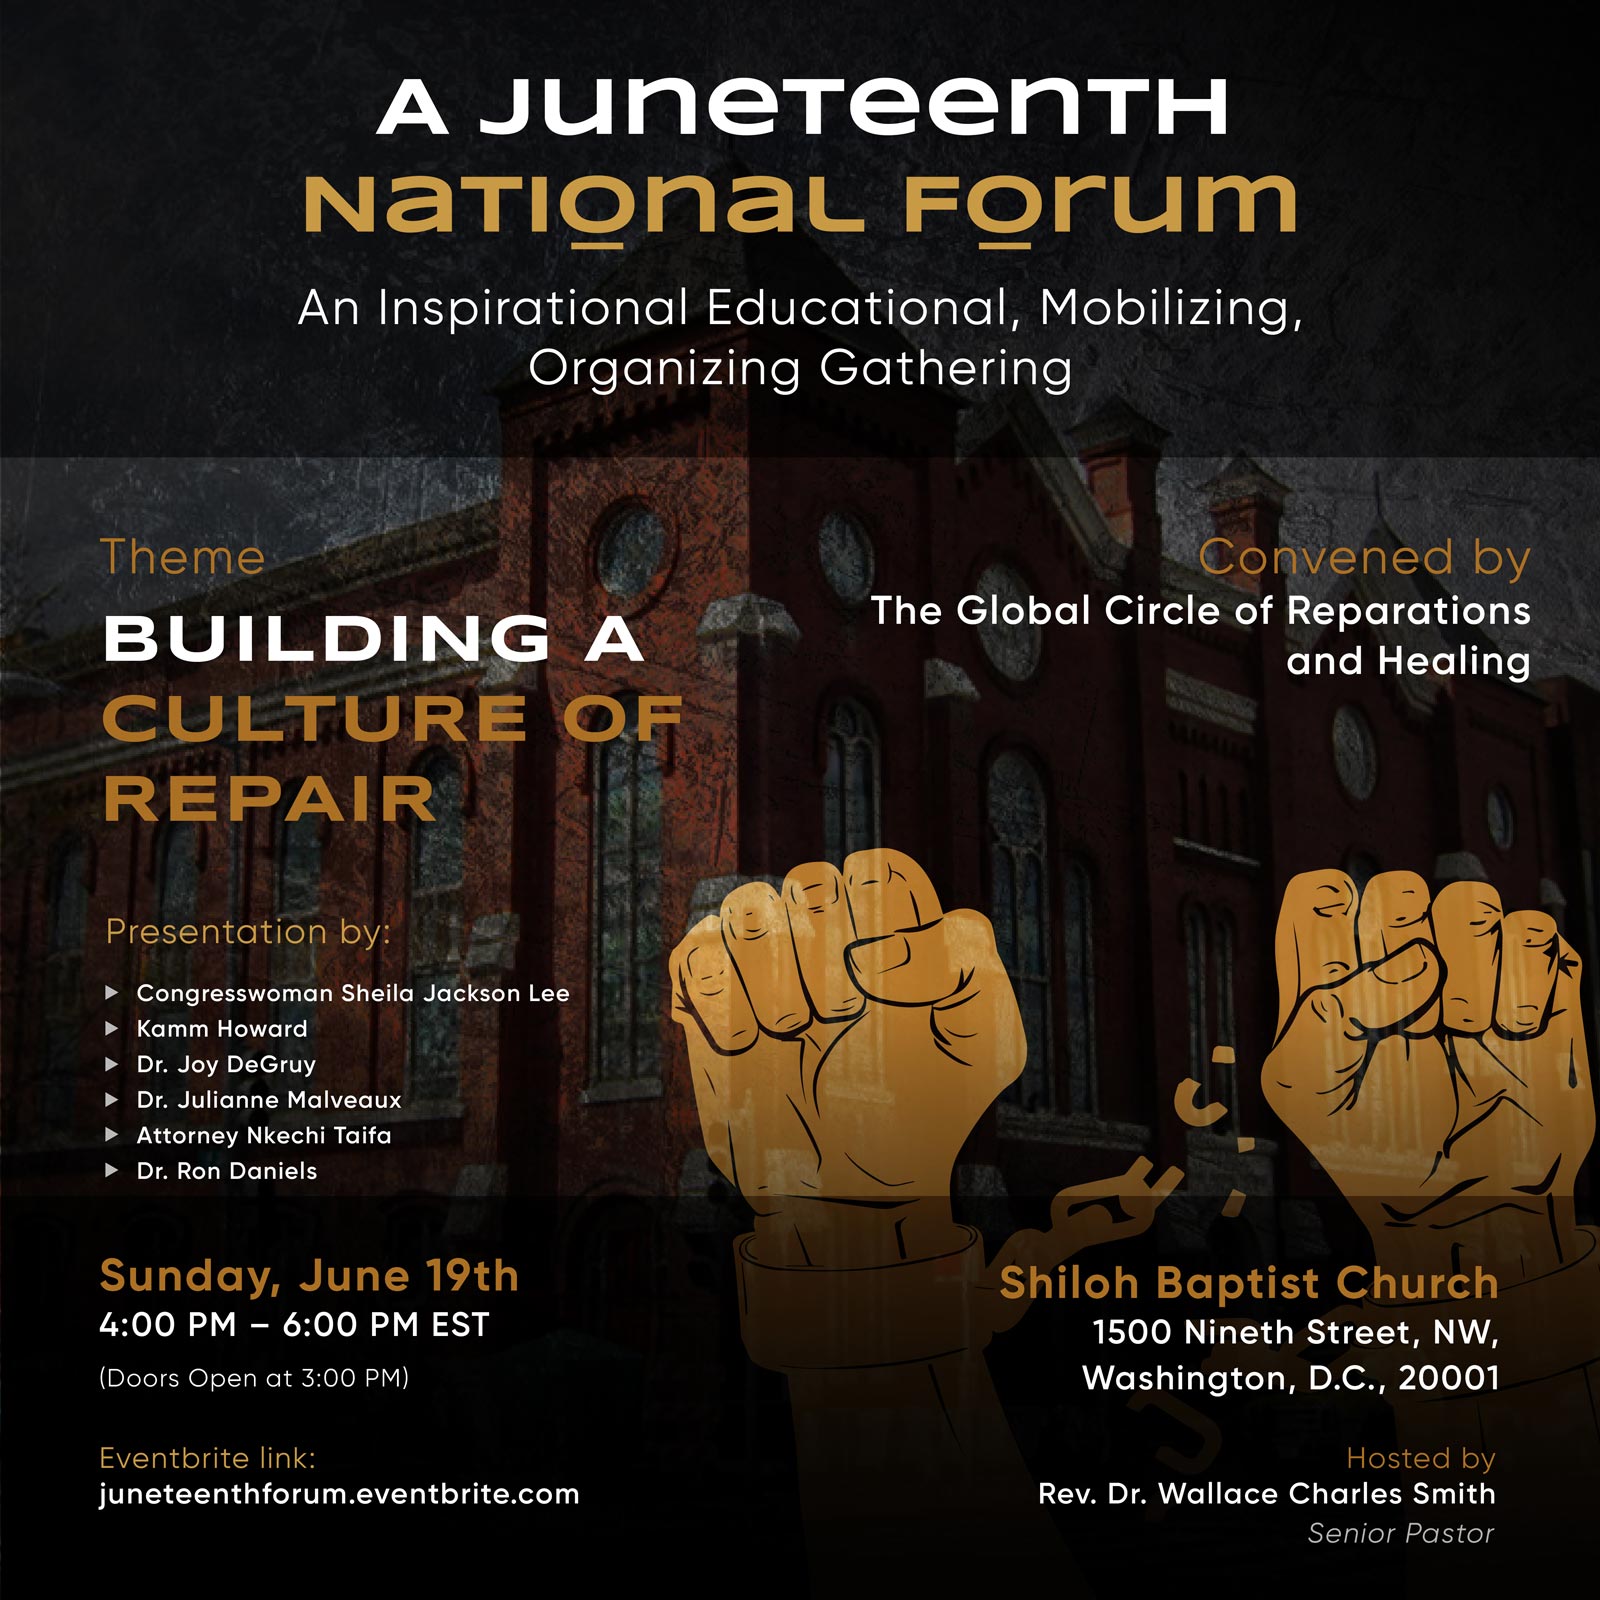 Sunday, June 19, 2022 — Building a Culture of Reparation: Juneteenth National Forum on Reparations